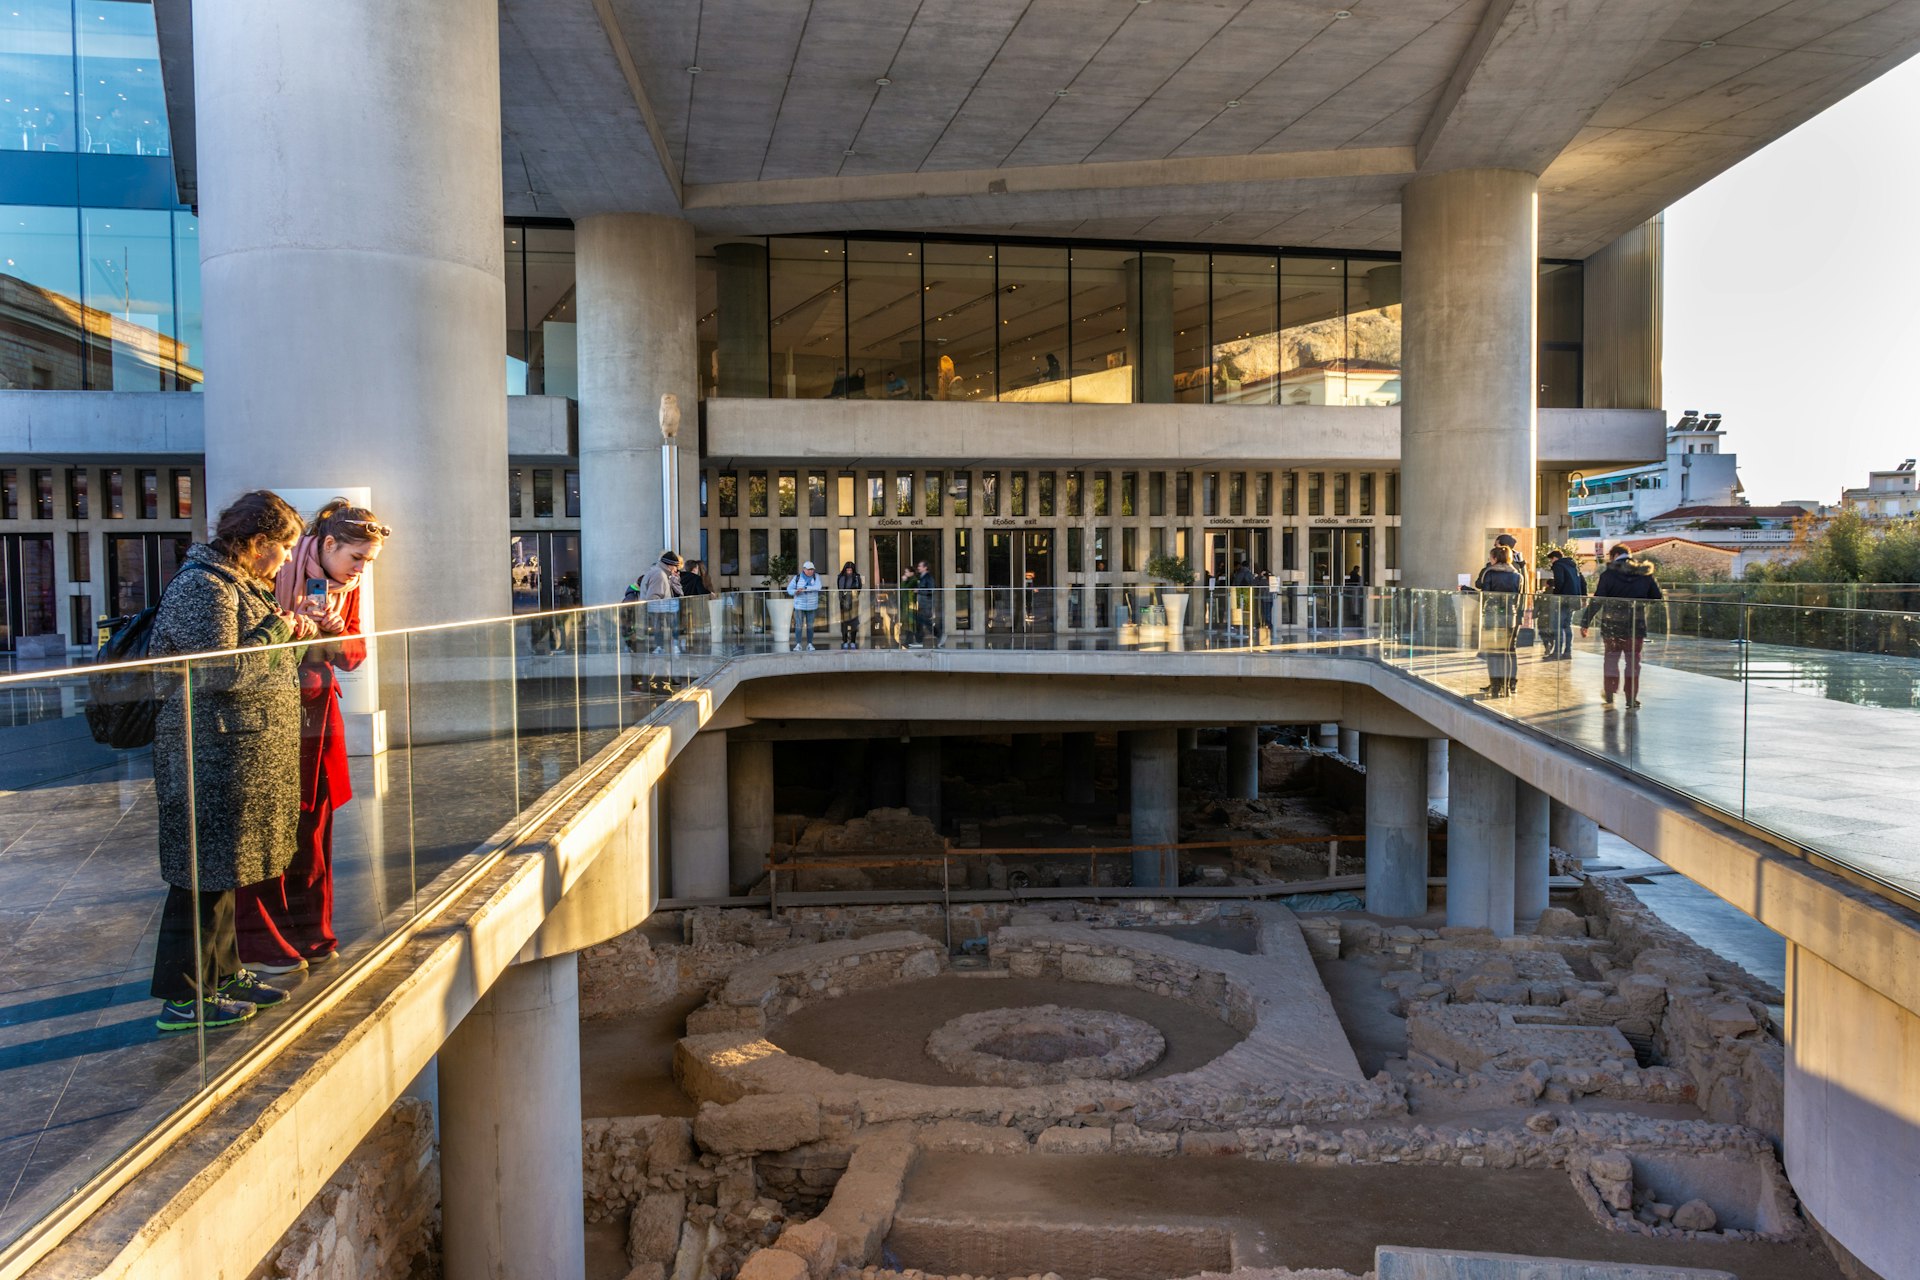 Entrance of the Acropolis Museum in Athens with two women looking at the excavated site from a bridge, Greece